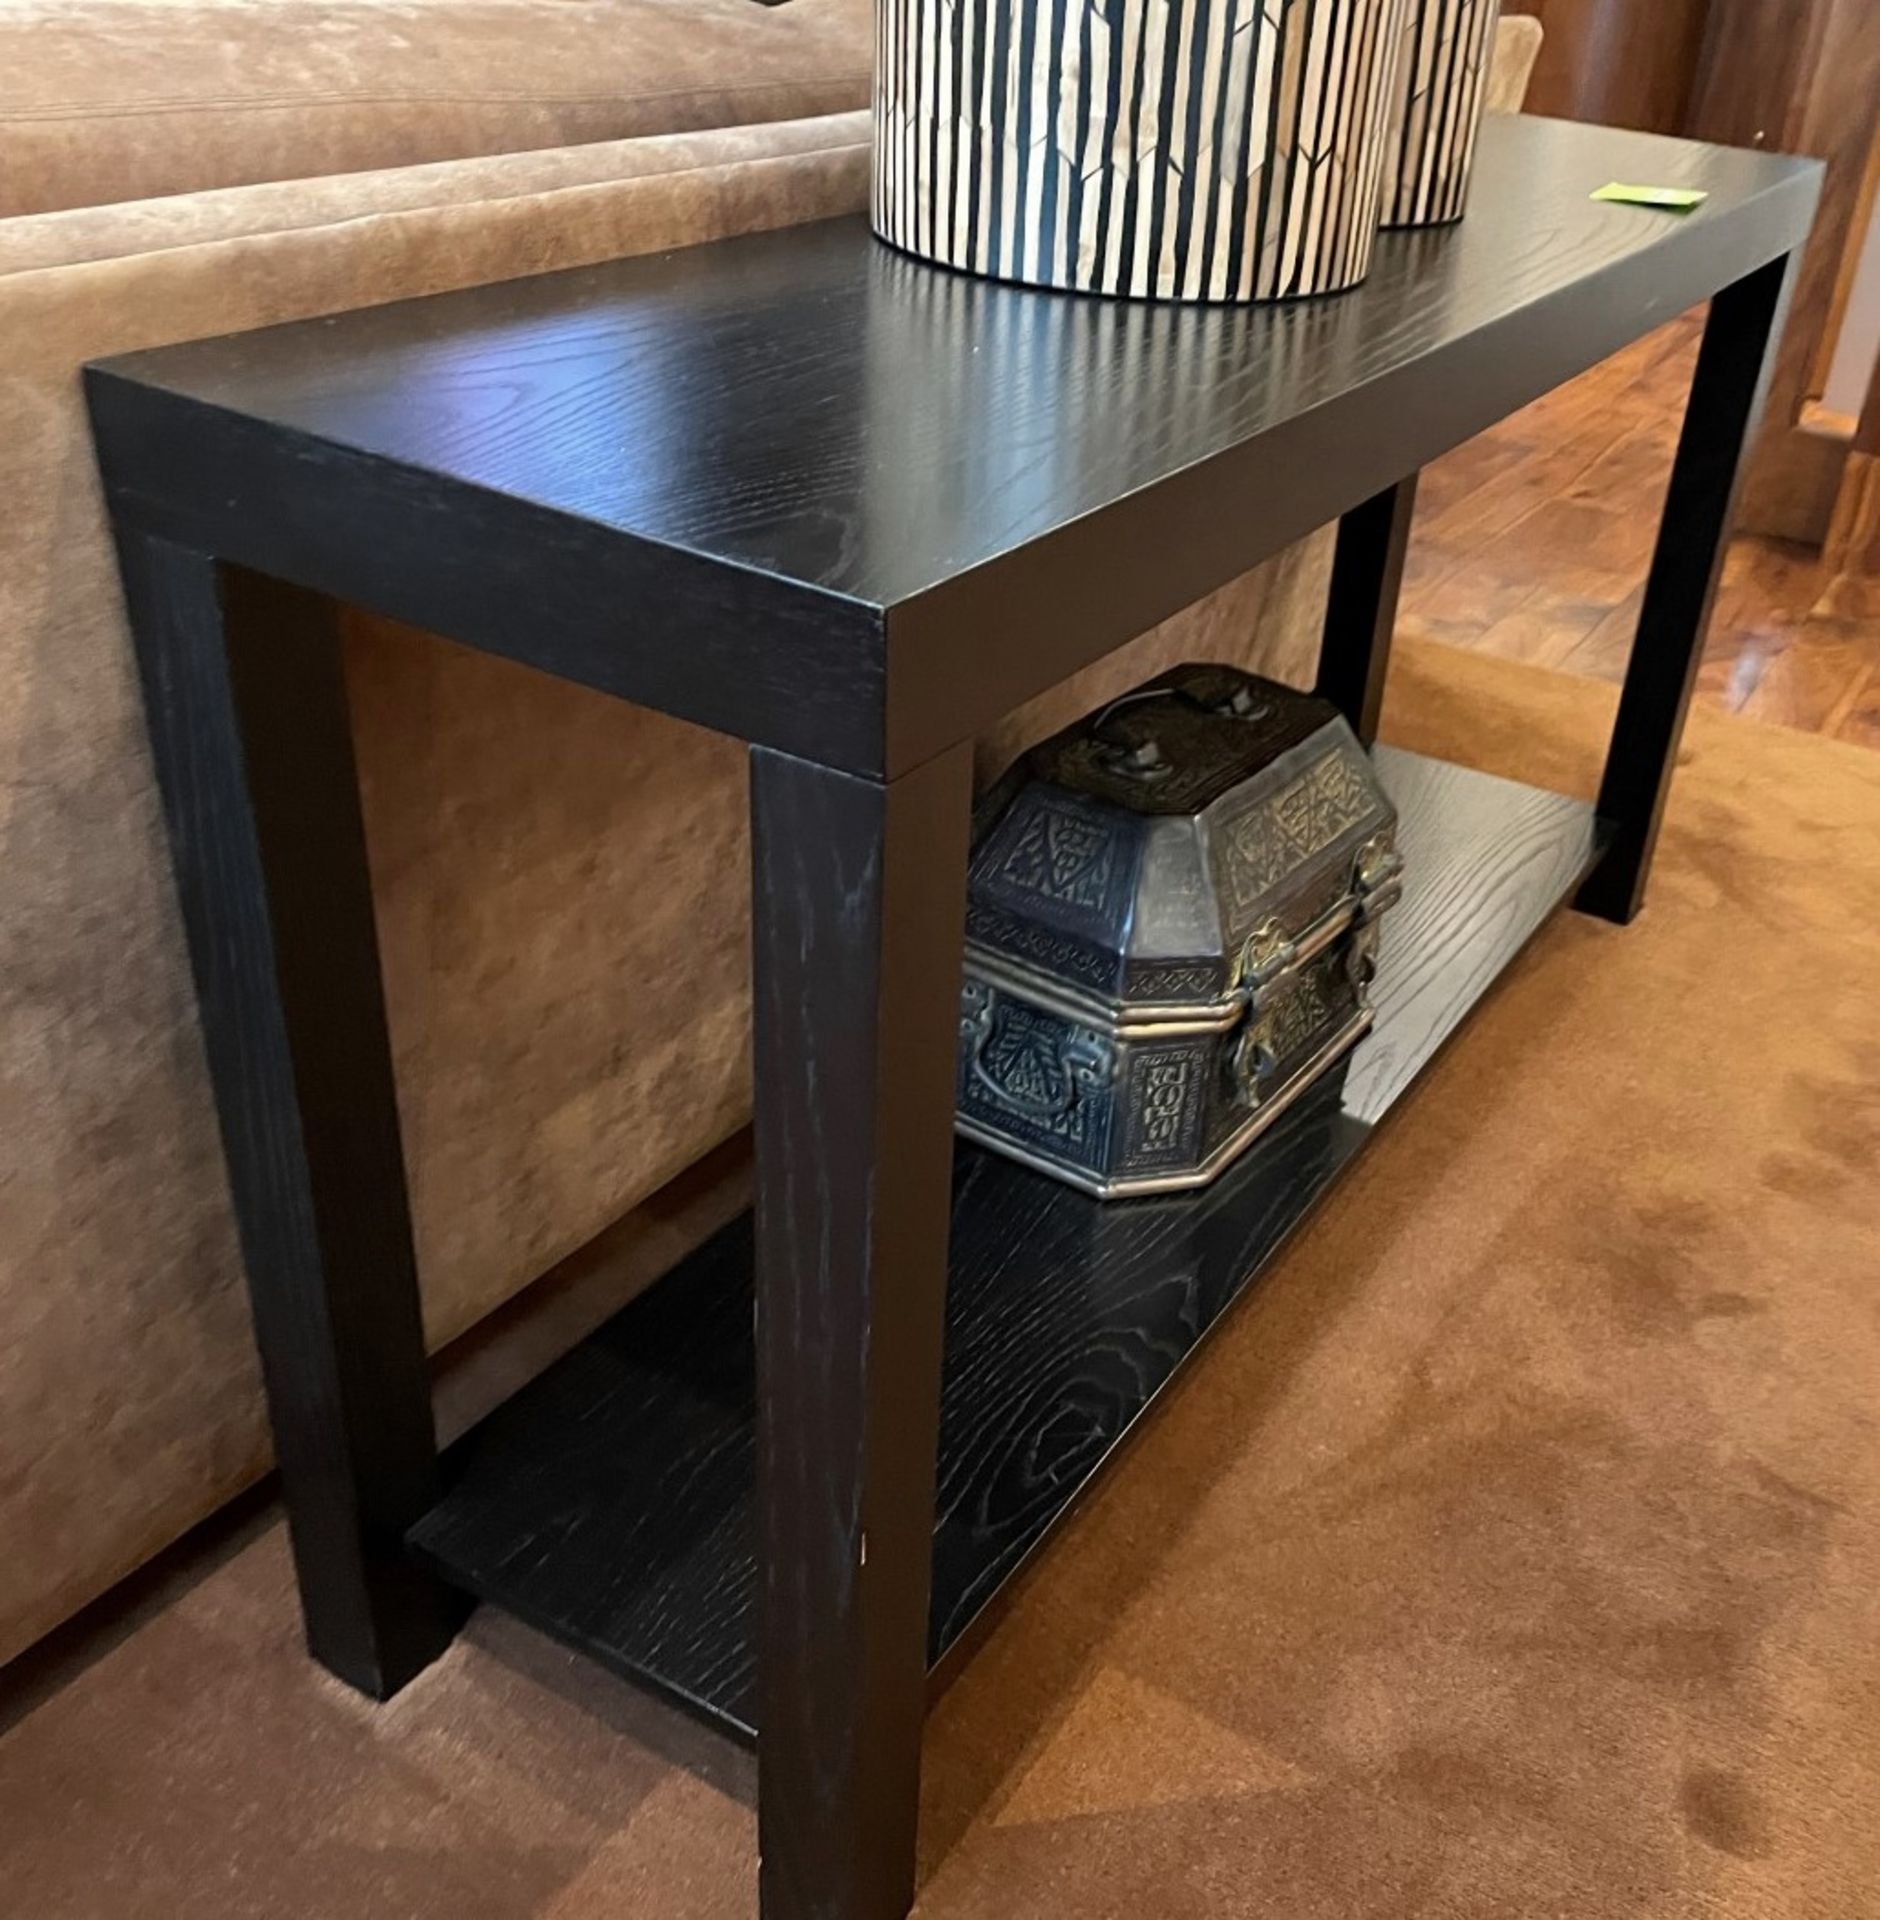 1 x Solid Wood Console Table In A Dark Wenge Stain - Dimensions: H78 x W150 x D40cm - Ref: SGV111 - - Image 3 of 8